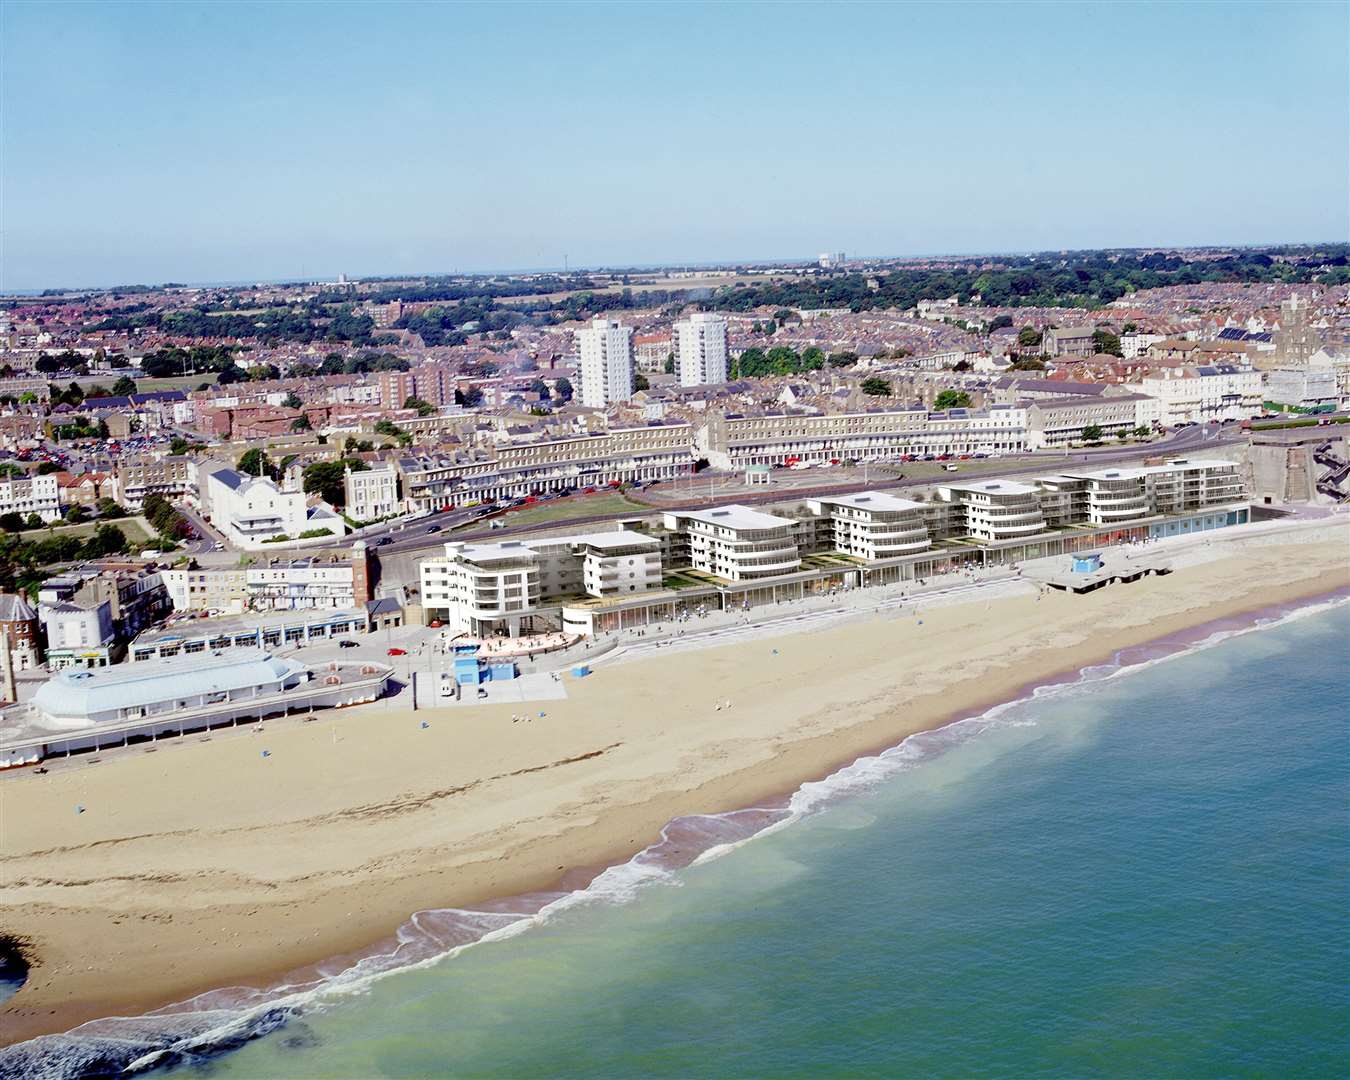 Planning permission and ground work had started for a 60-bedroom and 107 luxury apartments on the Royal Sands development in Ramsgate but it is unclear what Mr Rigden's plans for the new site will be